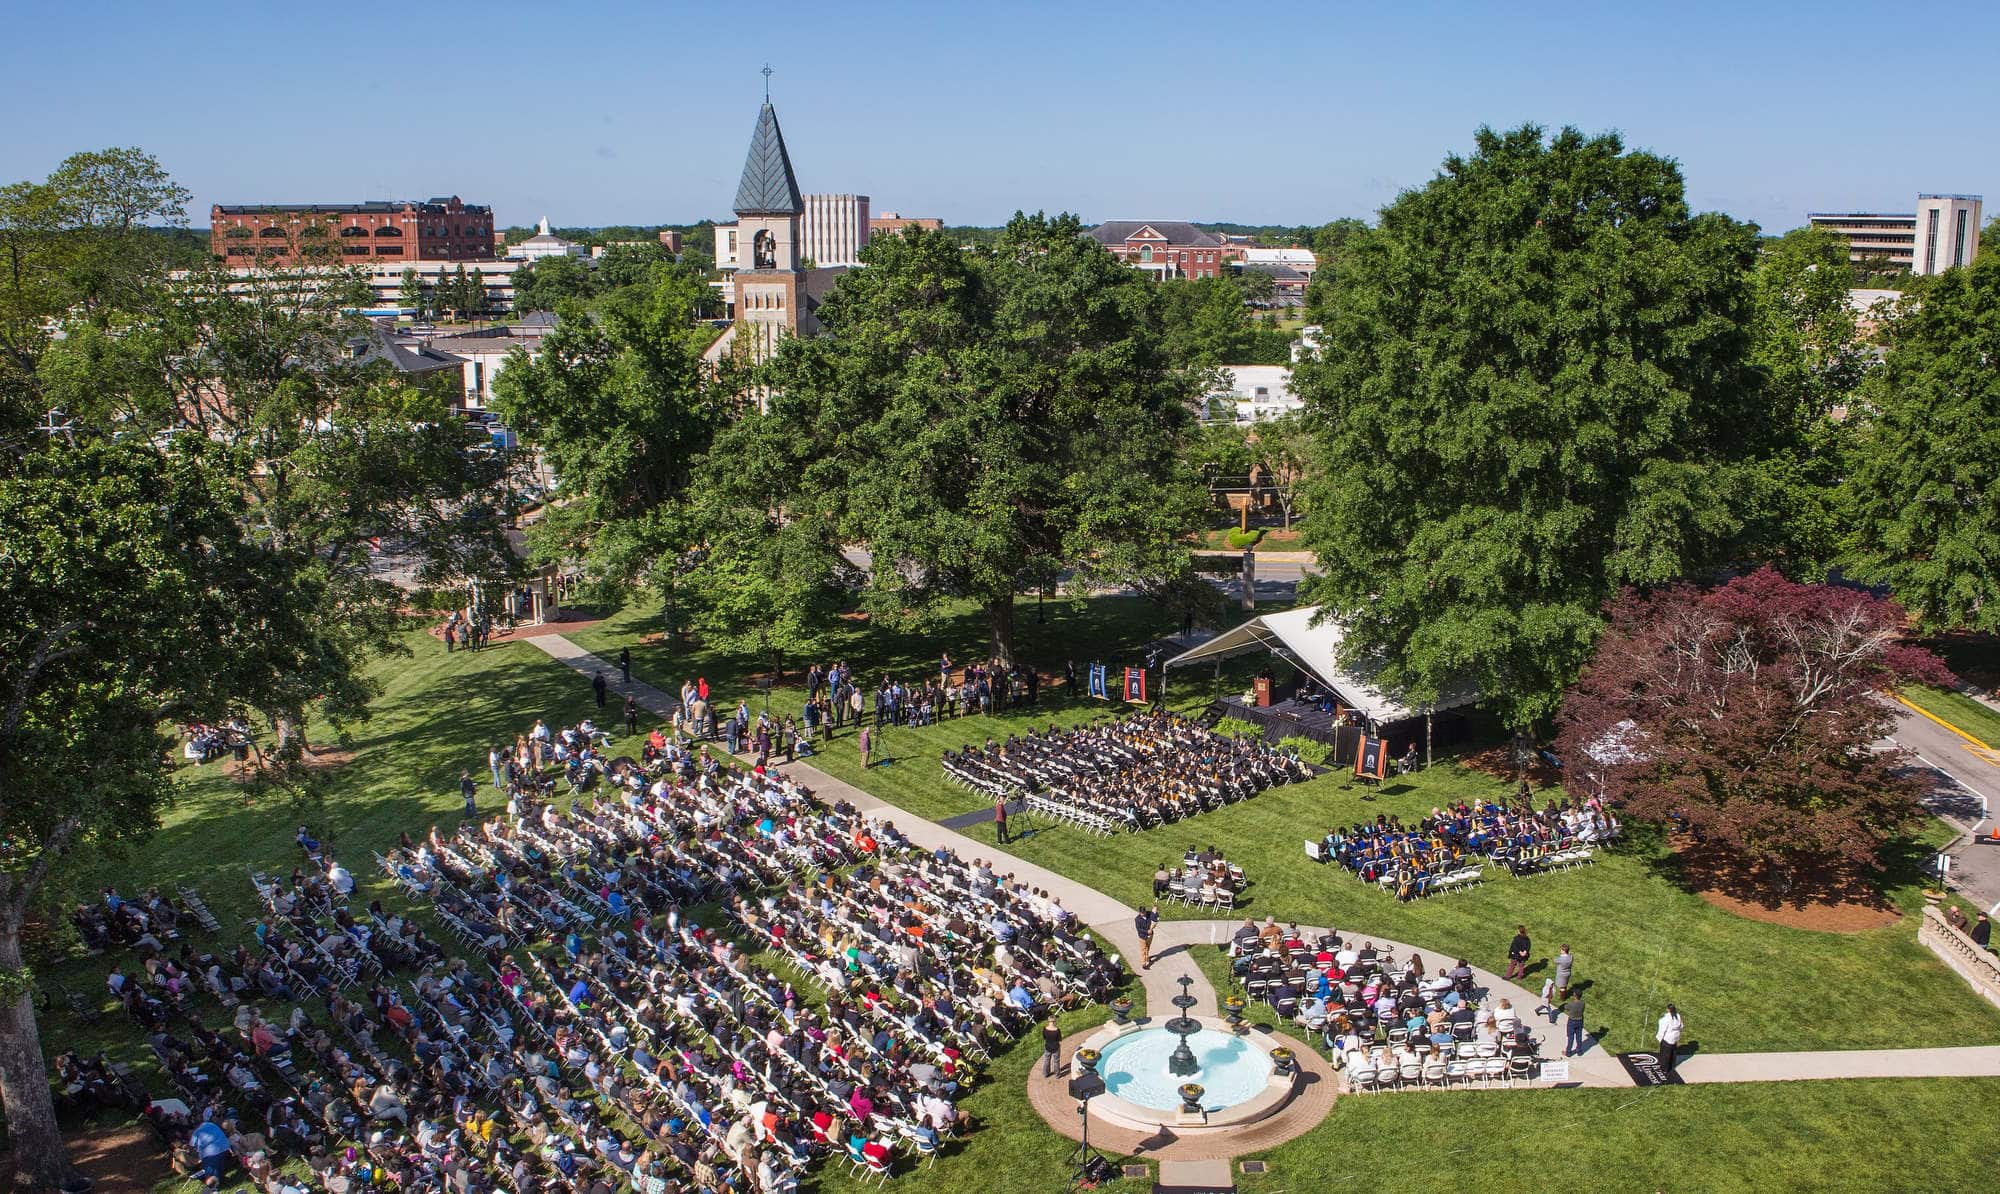 An aerial view of the historic Gainesville campus during a commencement ceremony